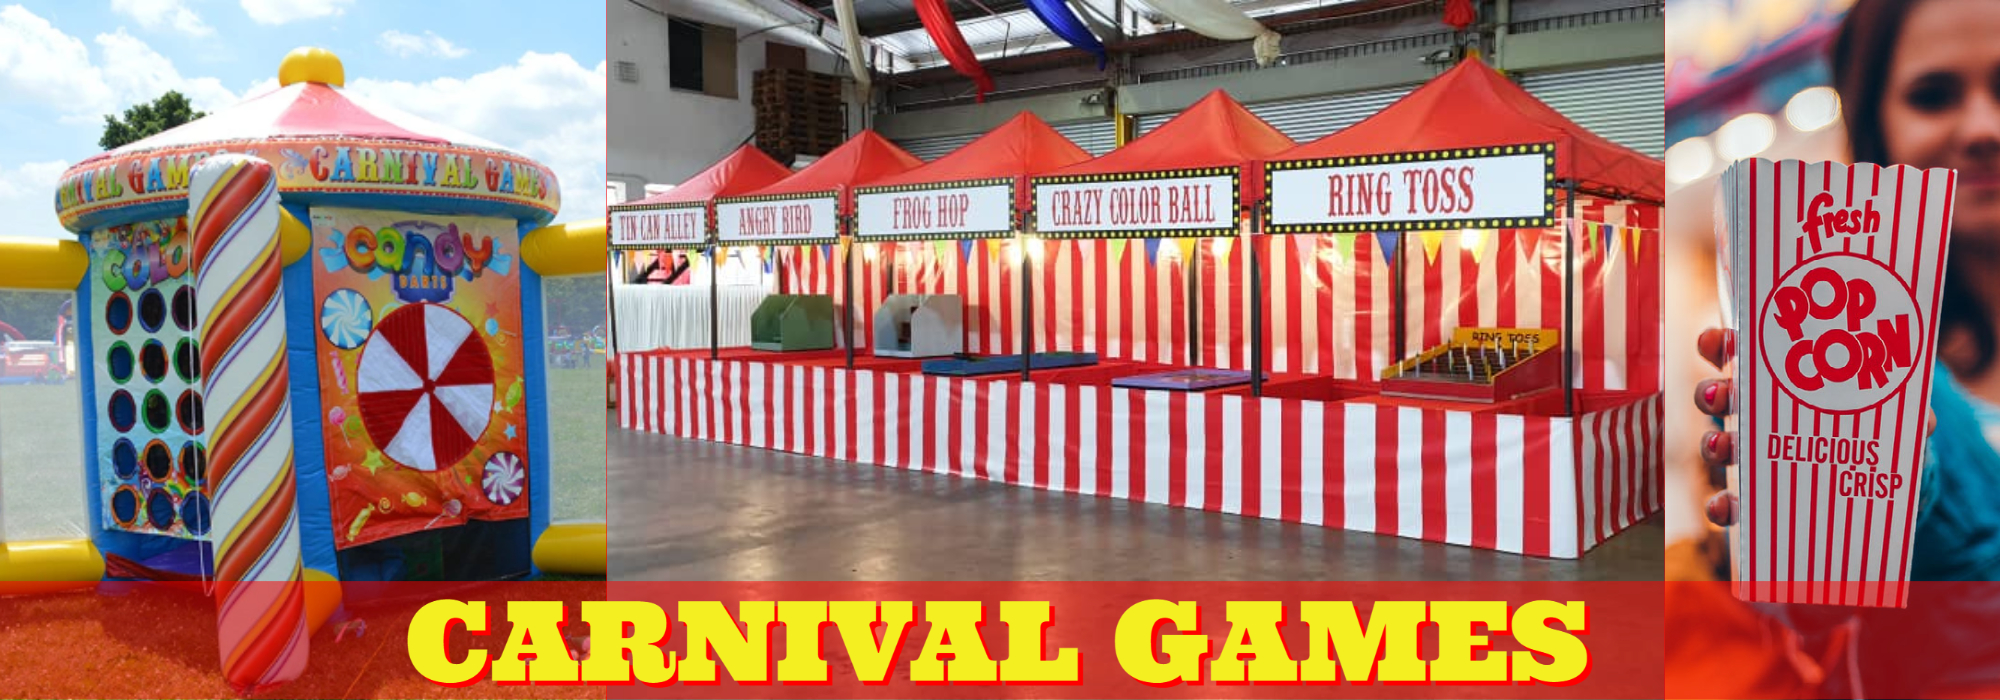 carnival-game-rentals-dallas-bounce-house-party-rentals-cleburne-tx